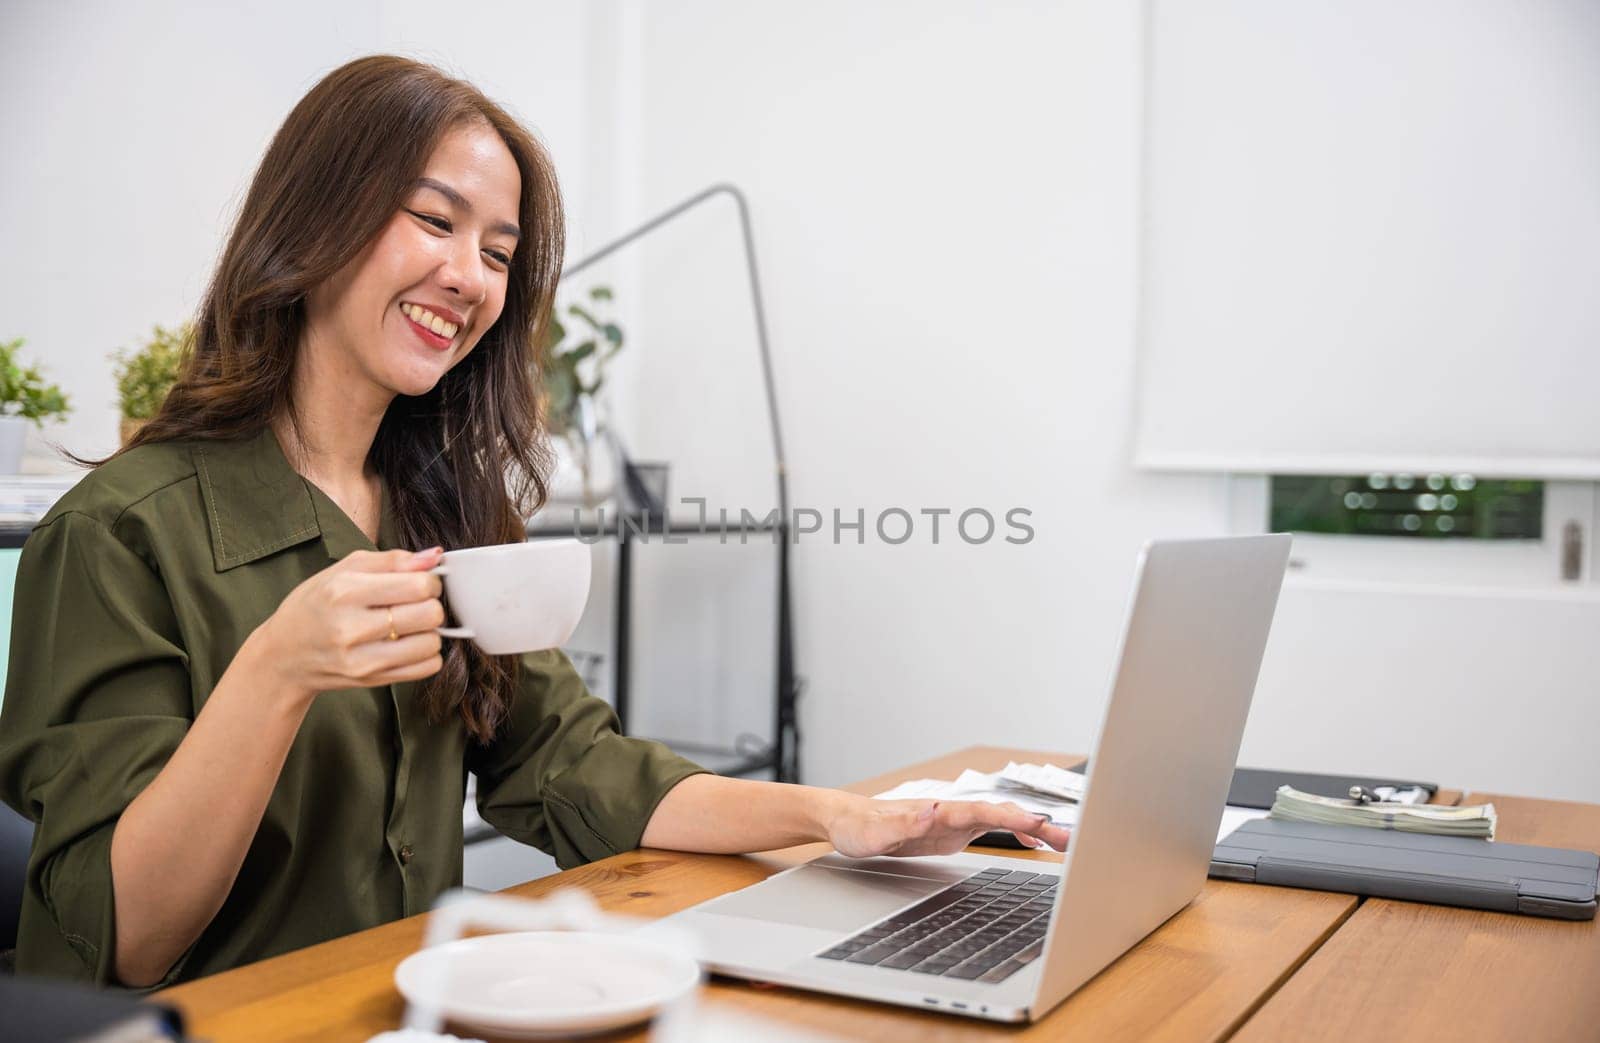 Portrait of beautiful woman holding coffee mug on hand while online shopping for cyber monday sales on laptop computer, smiling young business woman drinks coffee sitting desk using laptop keyboard